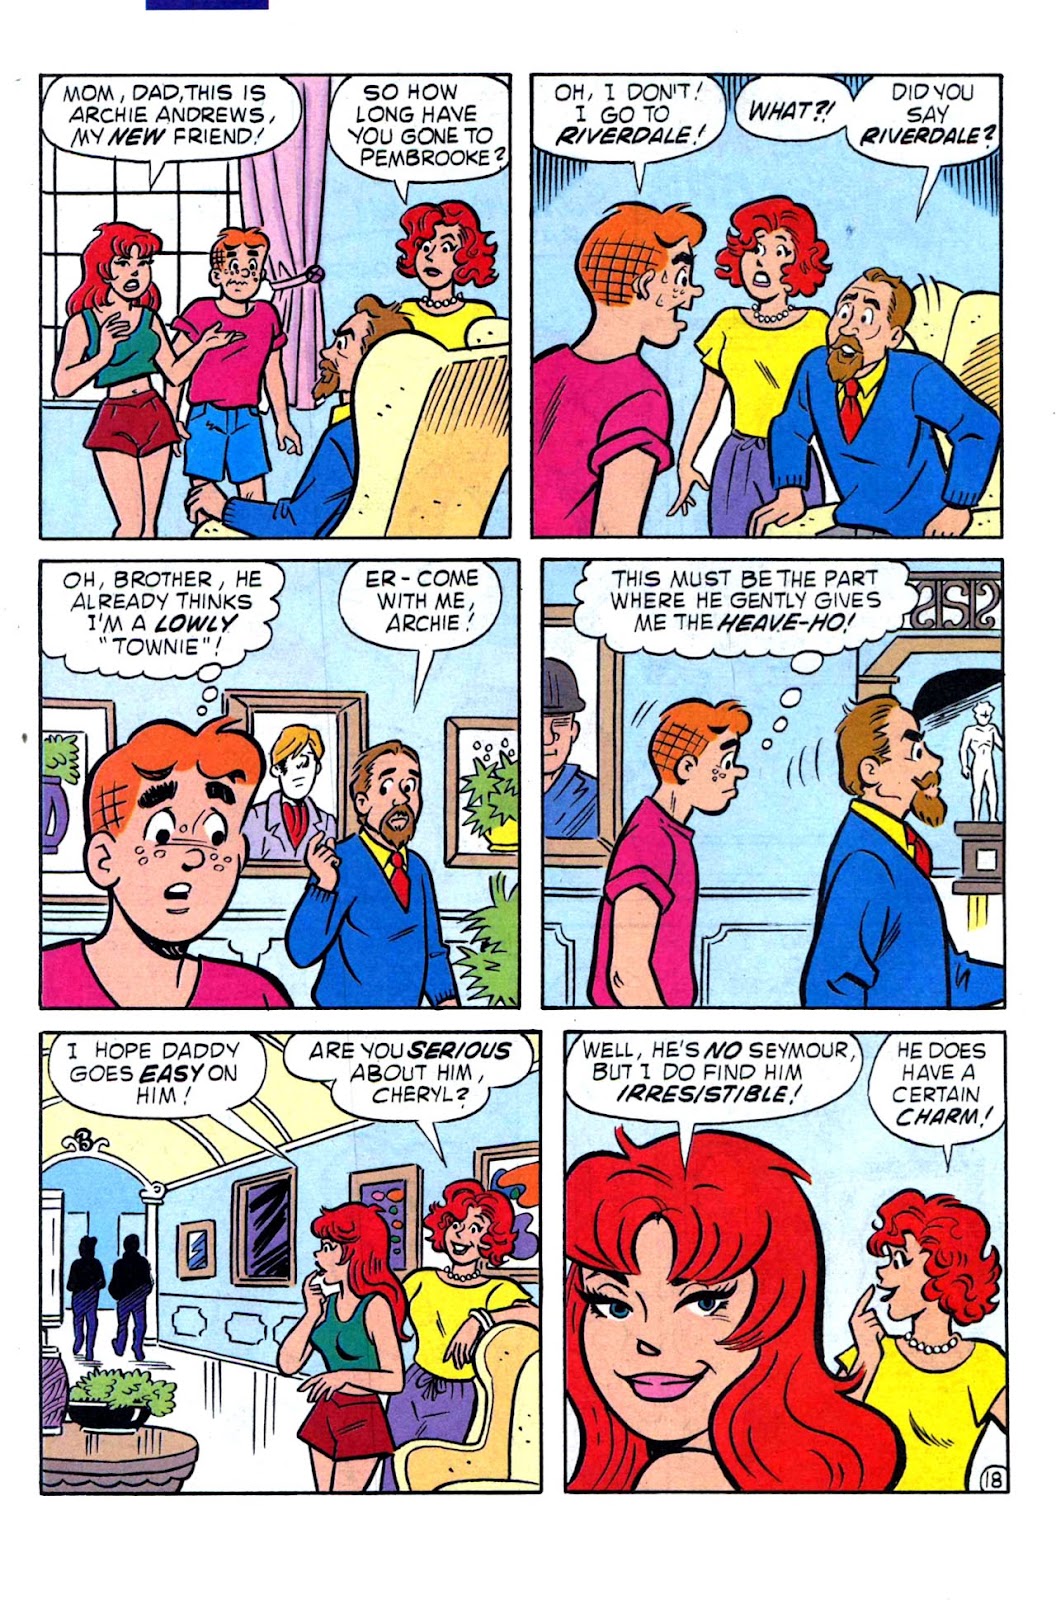 Cheryl Blossom (1995) issue 1 - Page 29